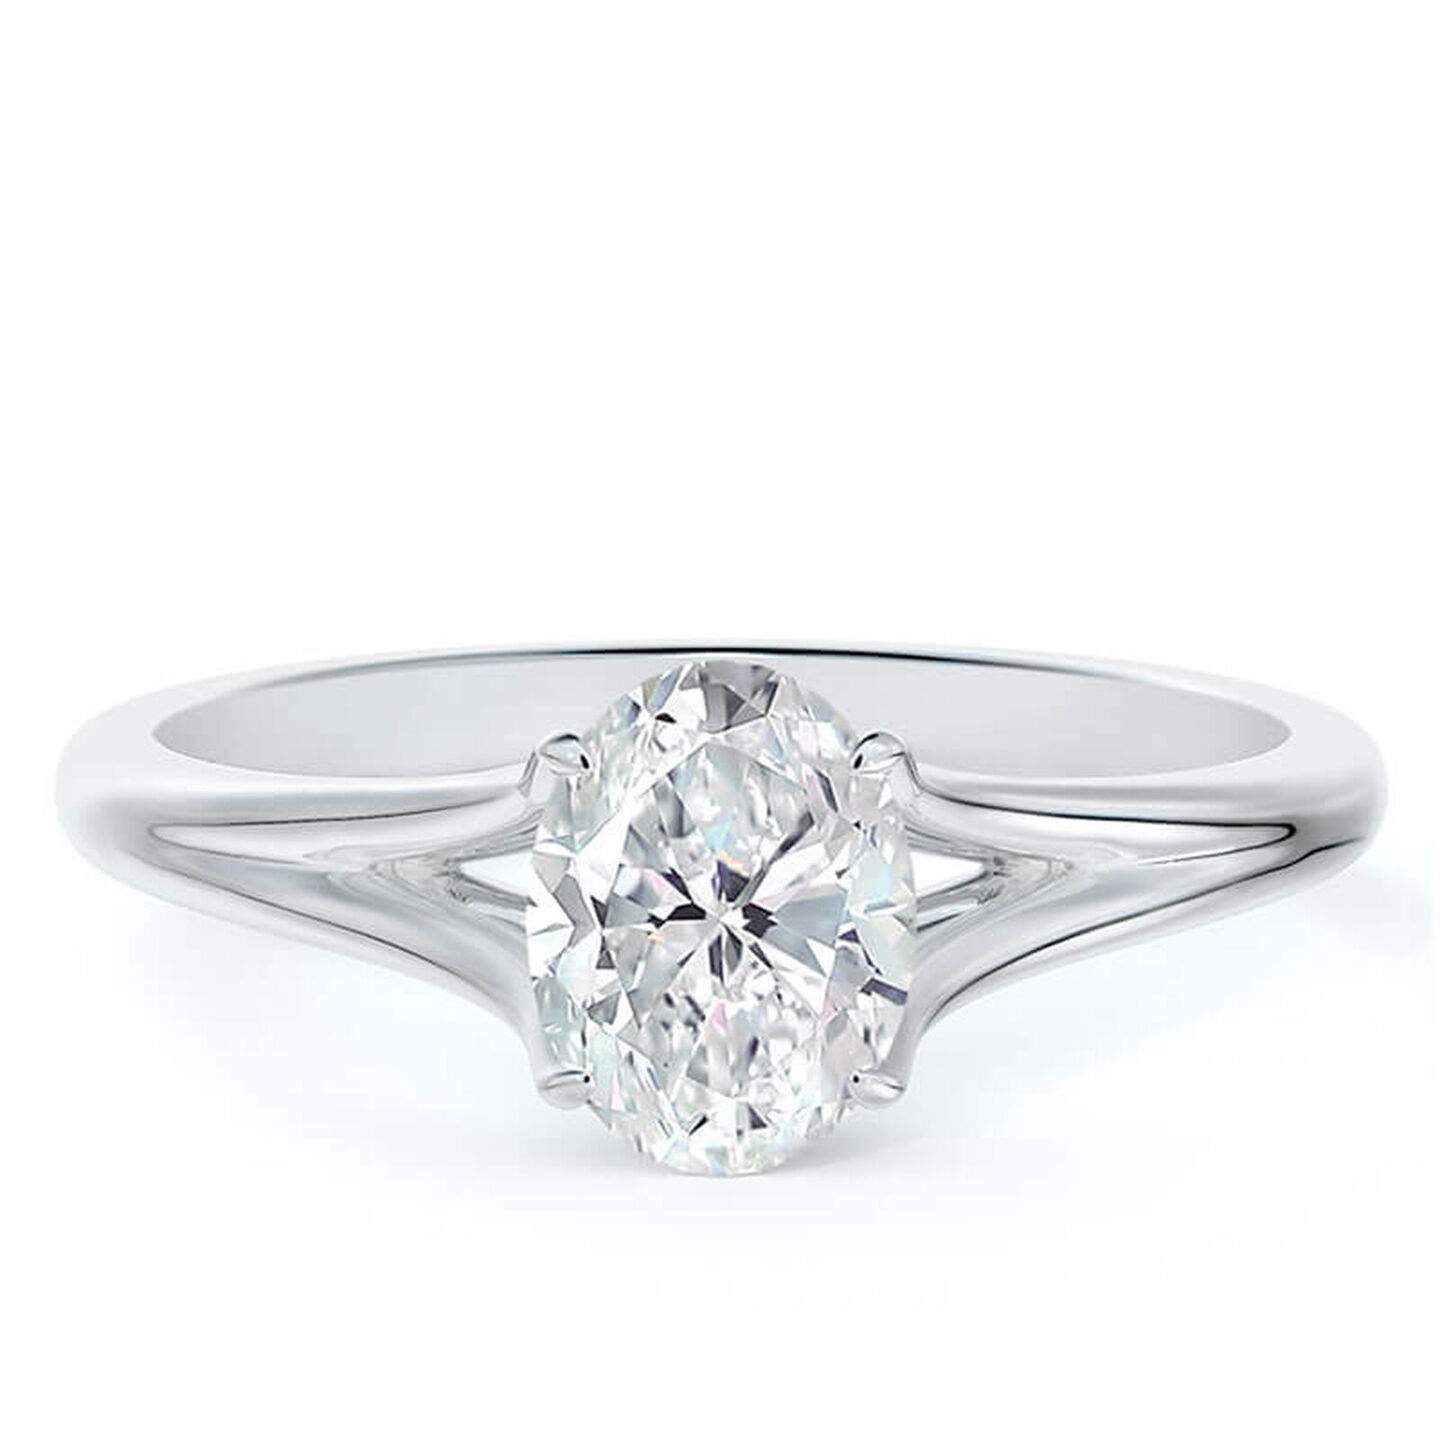 An oval diamond solitaire ring in white gold on a white surface